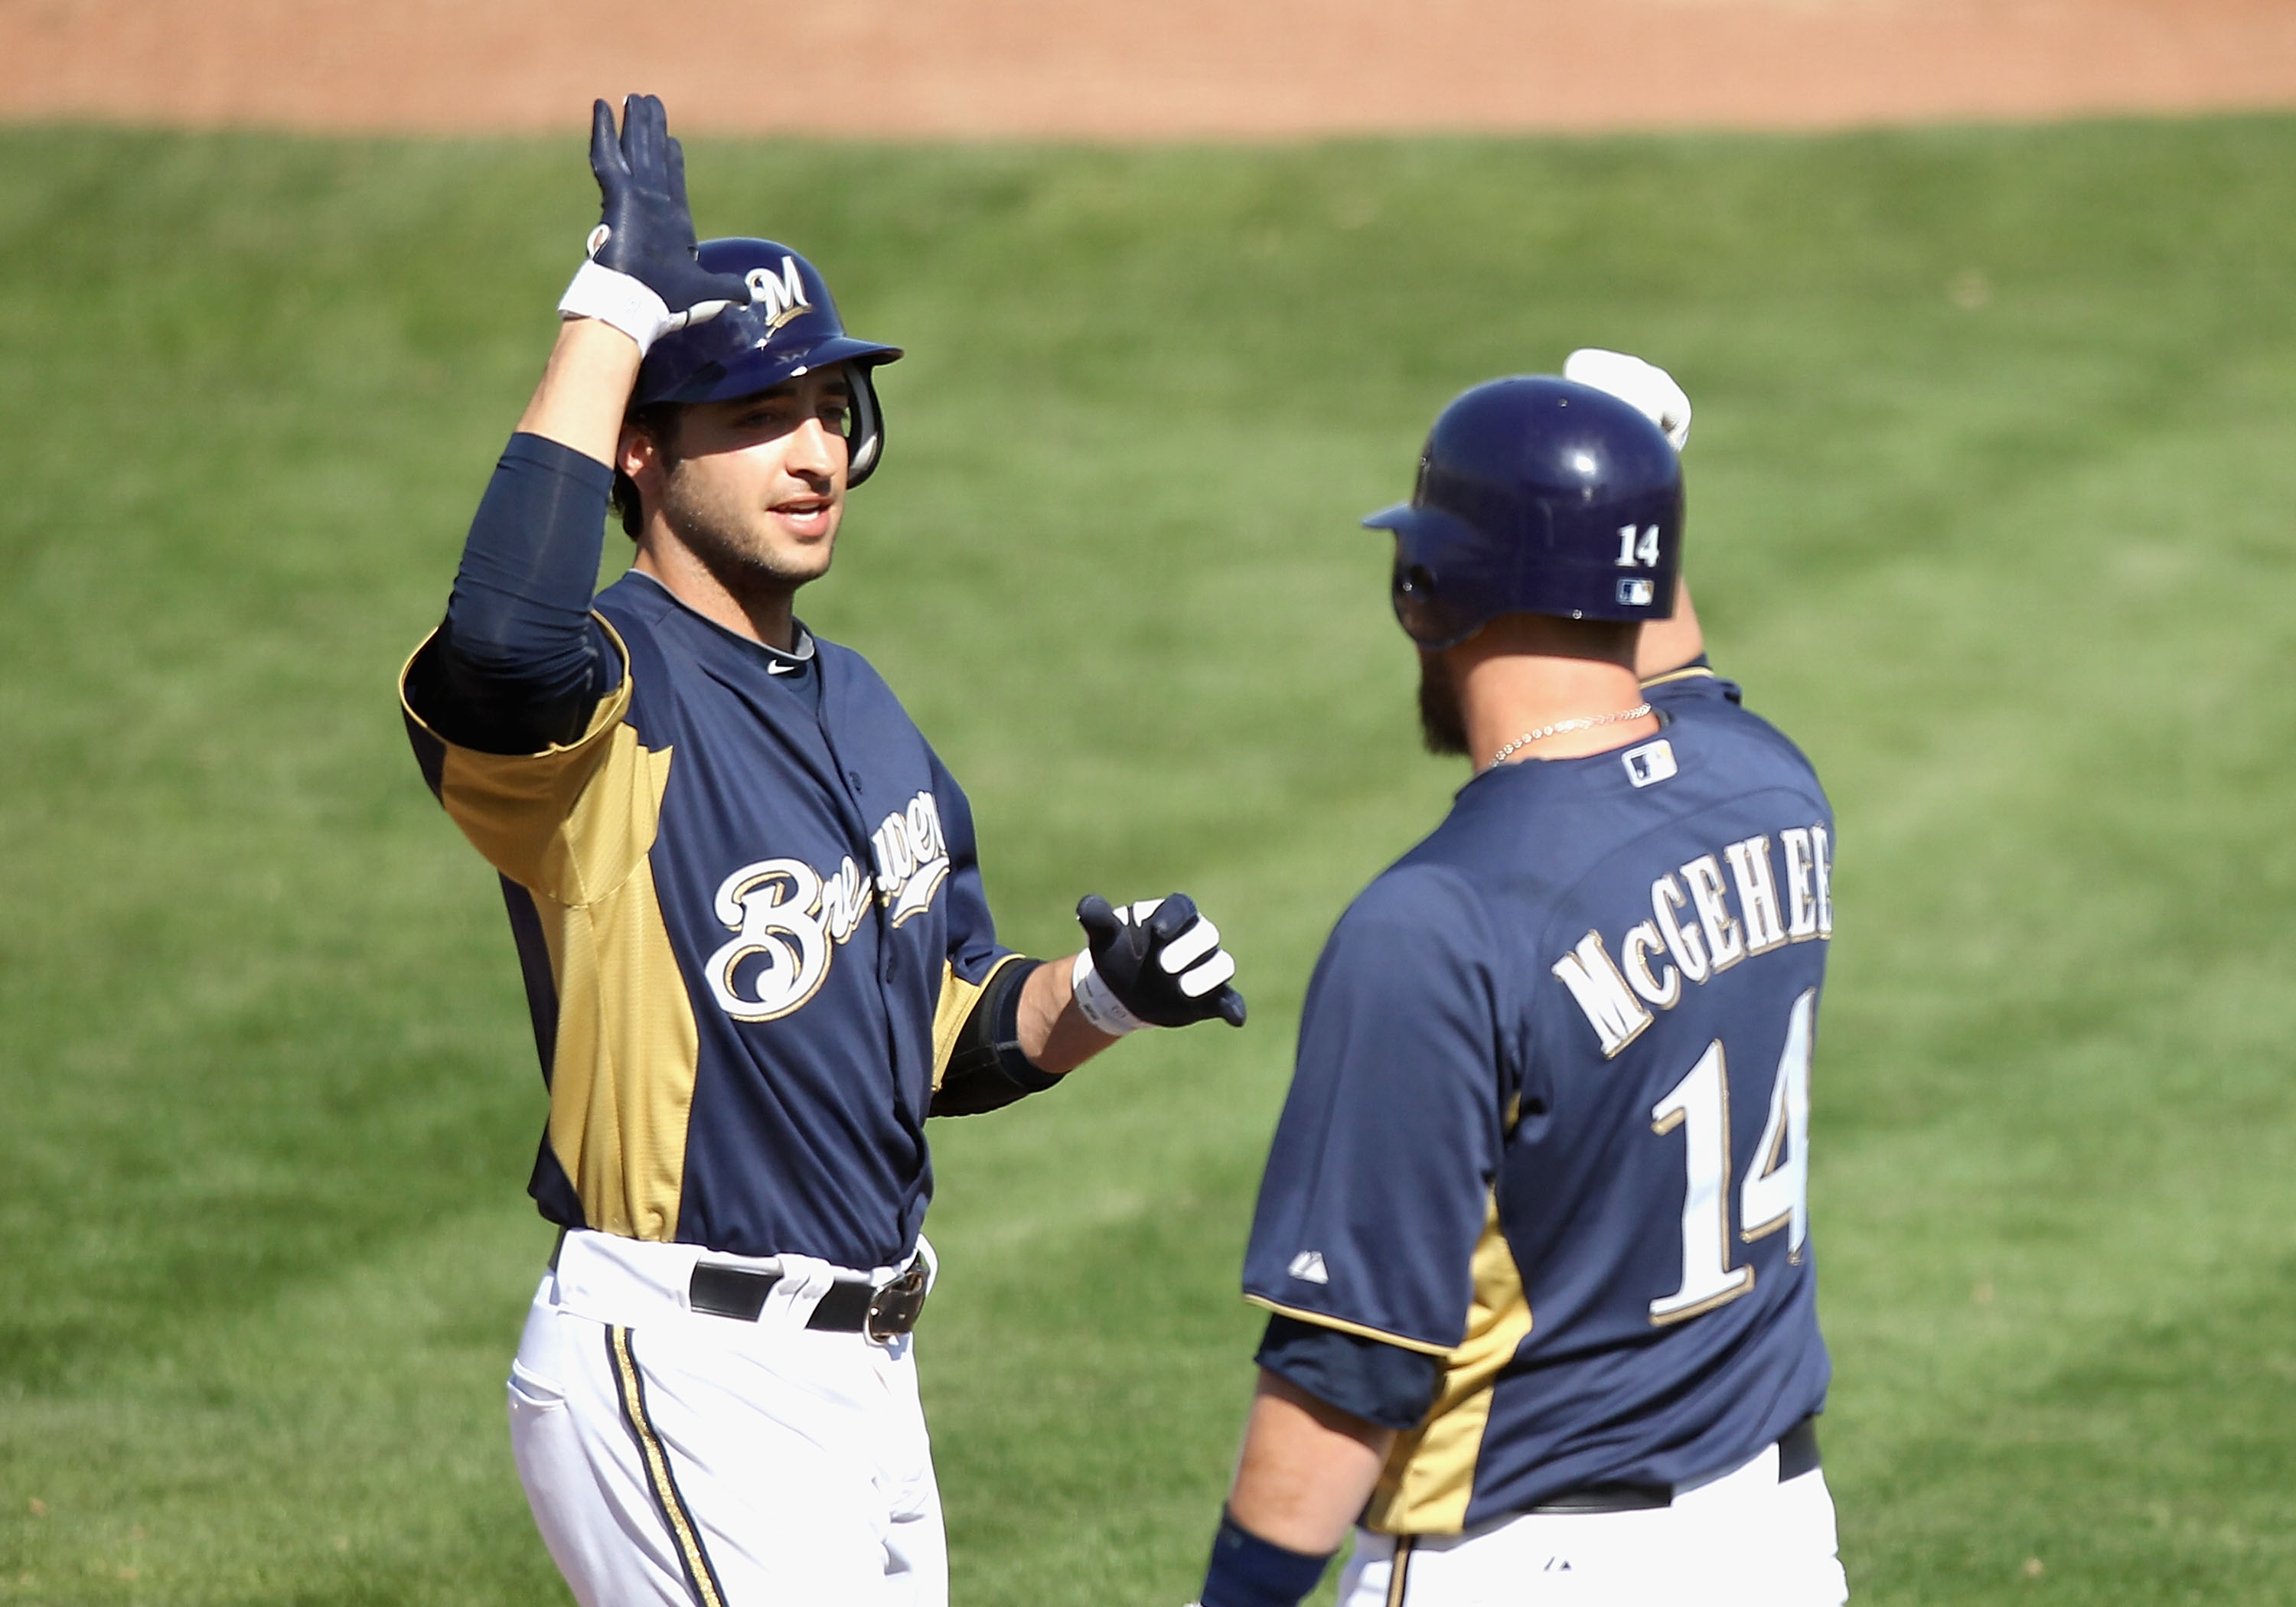 PHOENIX, AZ - MARCH 03:  Ryan Braun #8 of the Milwaukee Brewers high fives teammate Casey McGehee #14 after Braun hit a 2 run home run against the Oakland Athletics during the third inning of the spring training game at Maryvale Baseball Park on March 3,